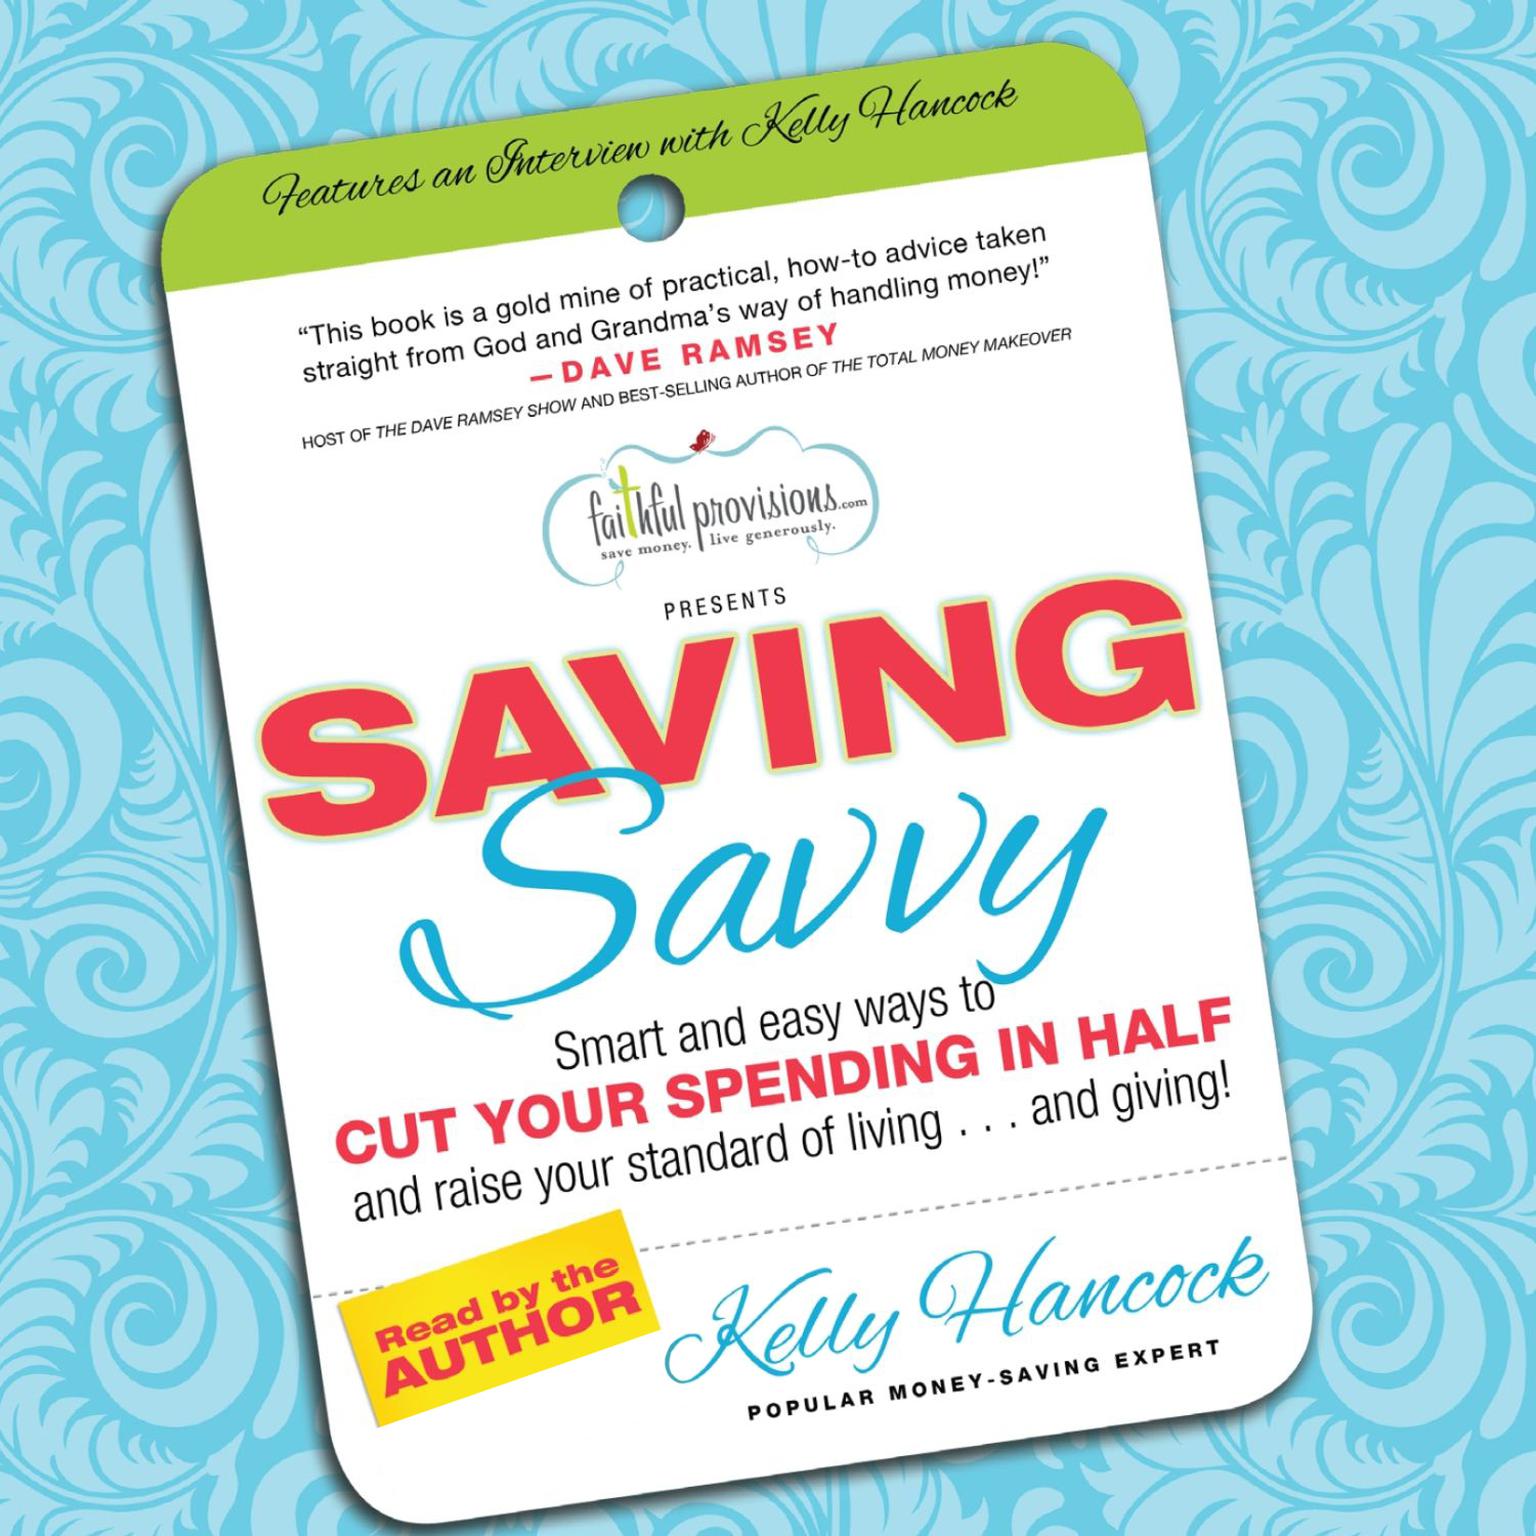 Saving Savvy: Smart and Easy Ways to Cut Your Spending in Half and Raise Your Standard of Living and Giving Audiobook, by Kelly Hancock